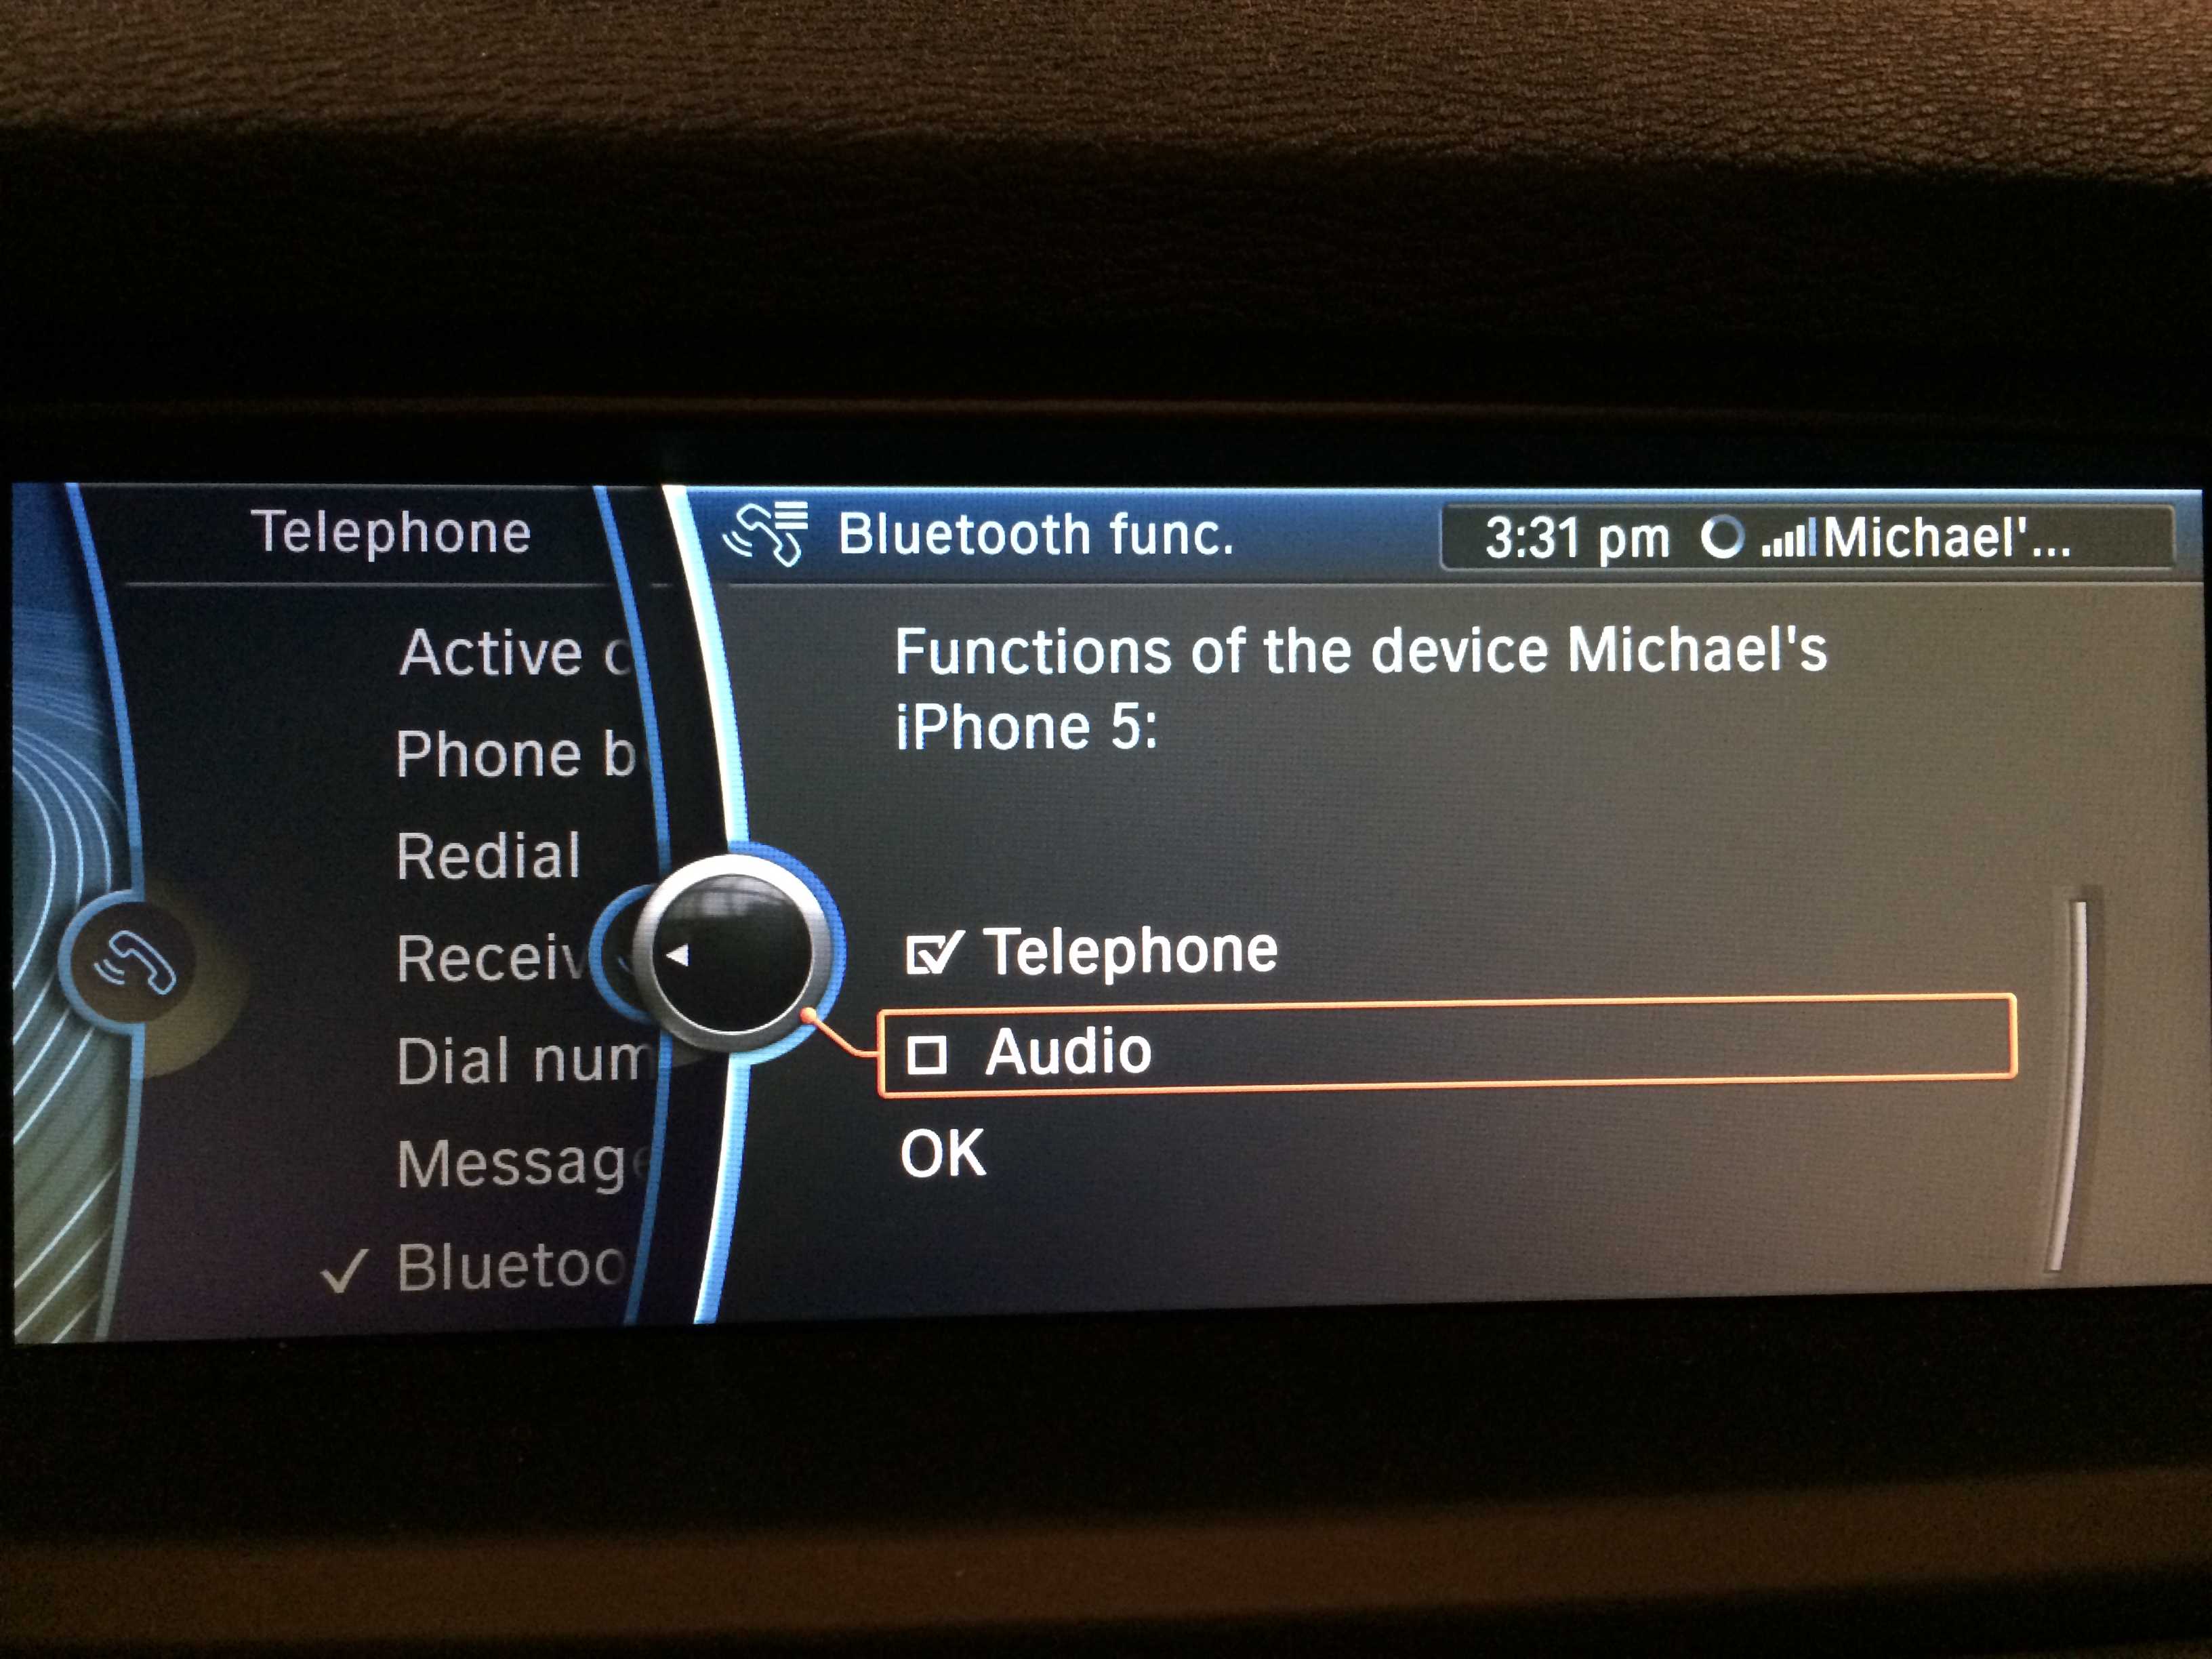 Iphone 5 bluetooth problems with bmw